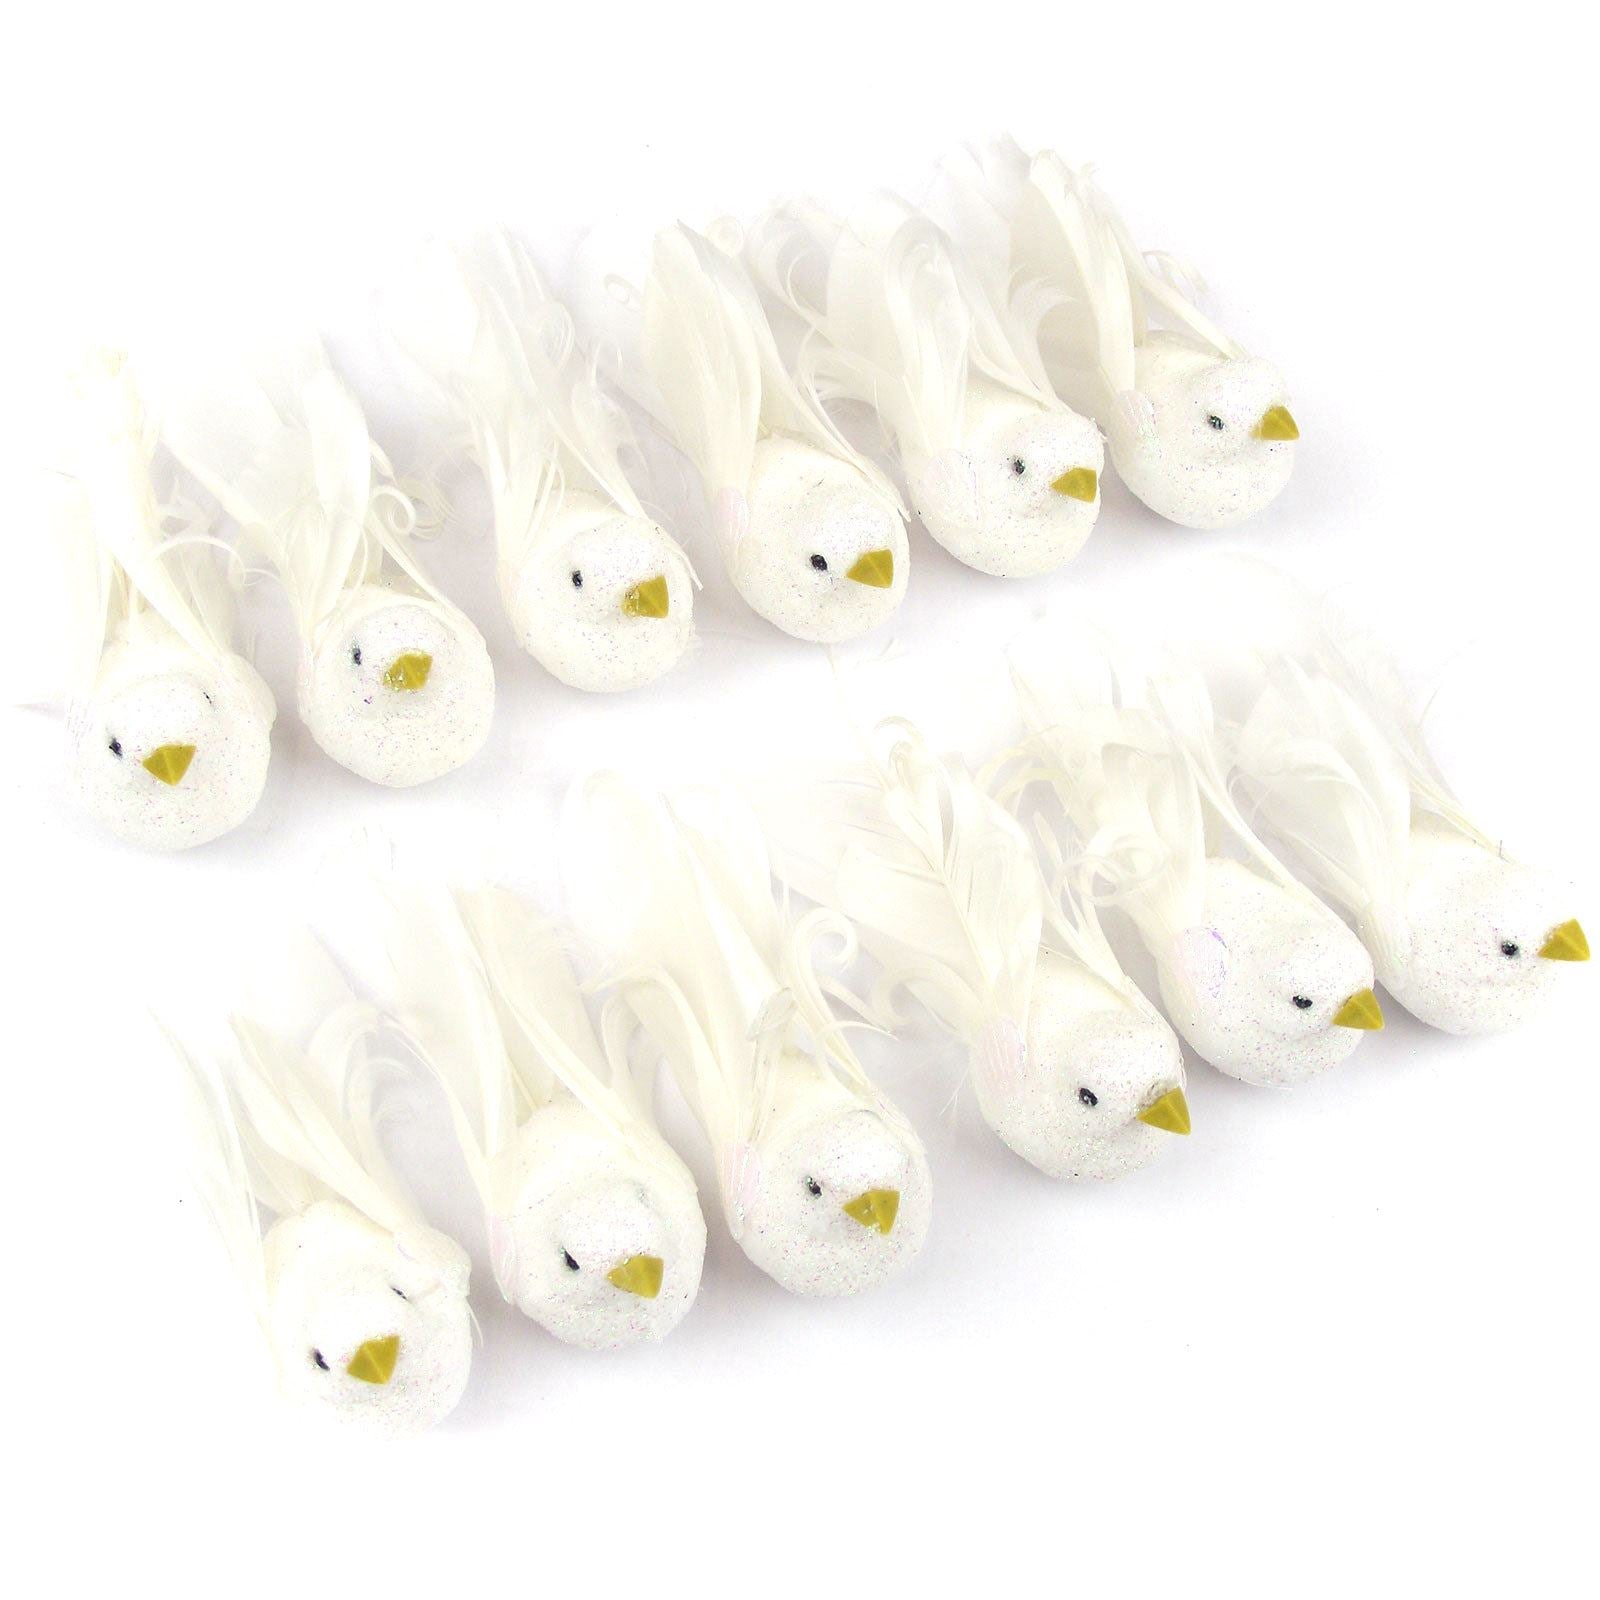 12x Iridescent White Feather Tail Artificial Birds